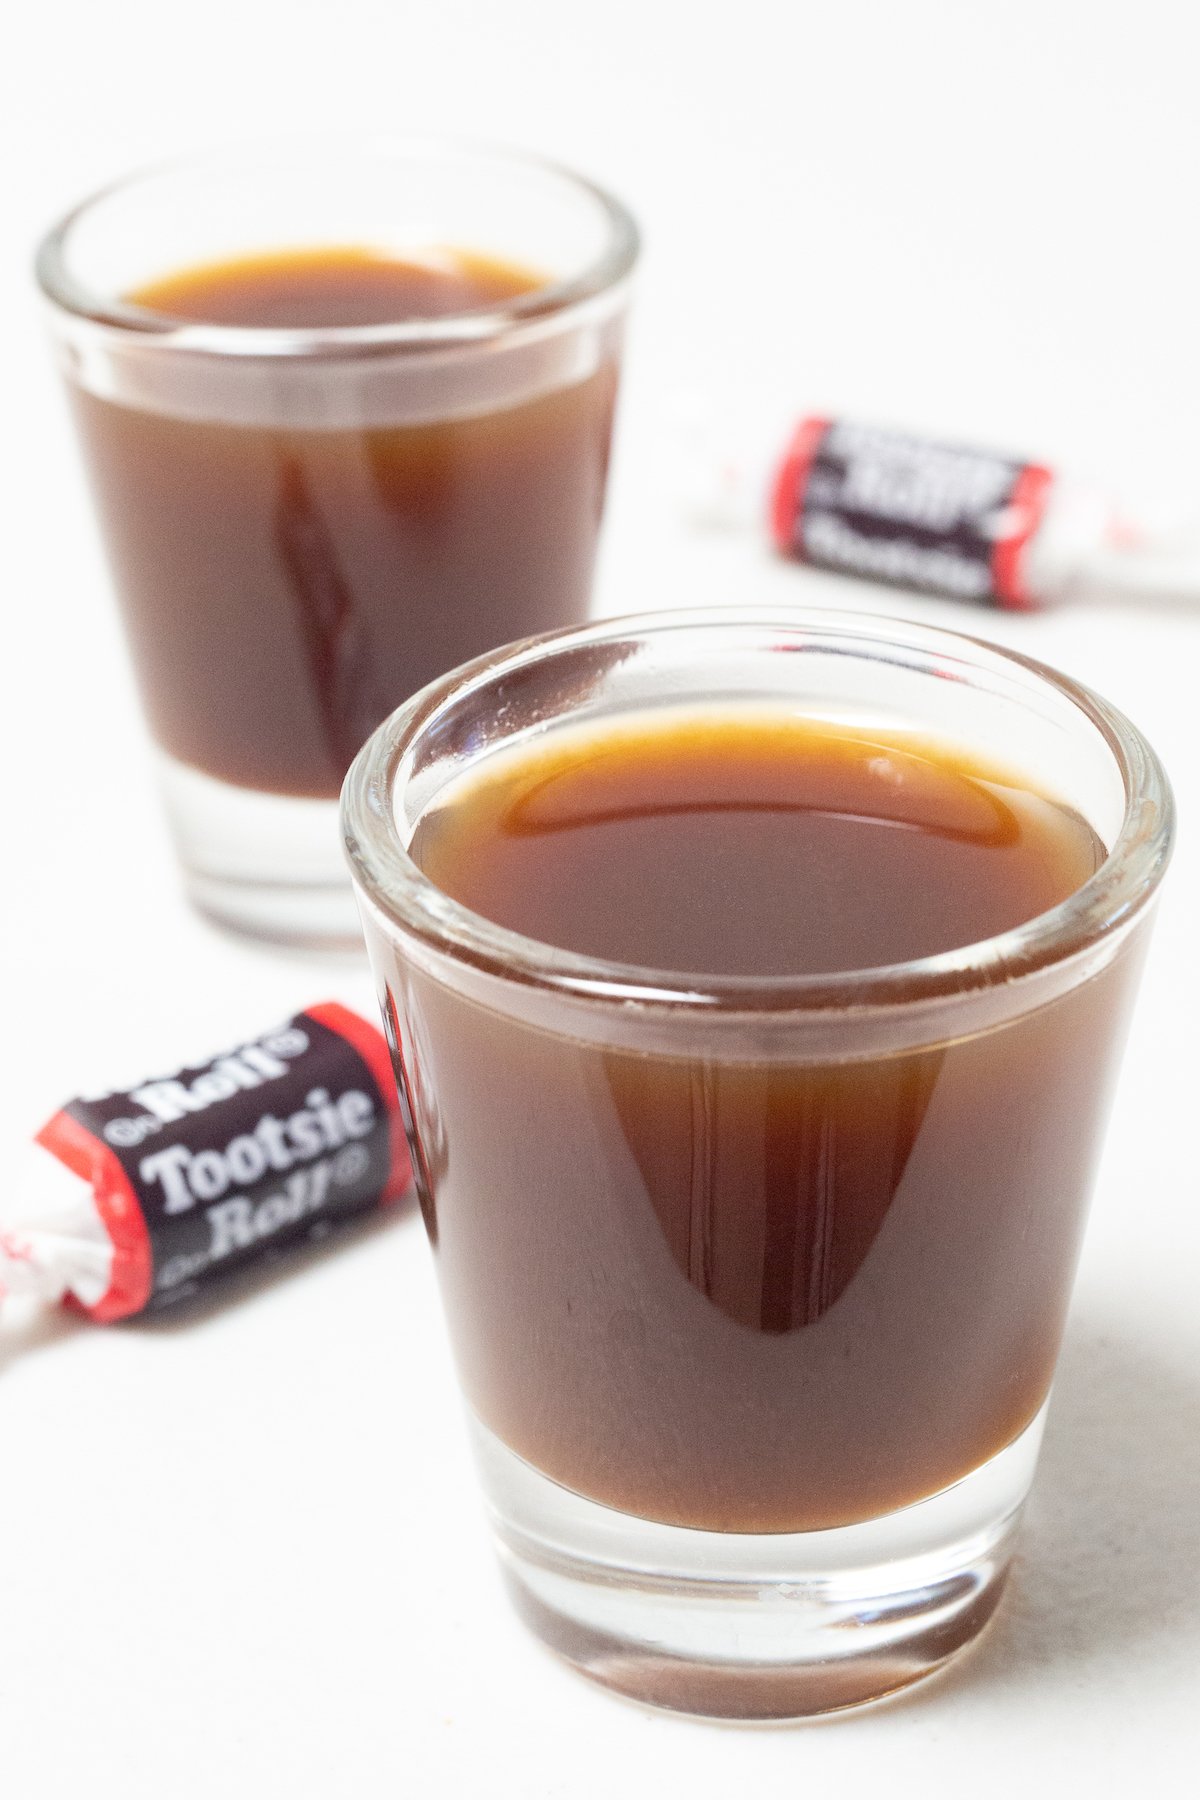 Two shot glasses filled with brown tootsie roll shots on a white background.